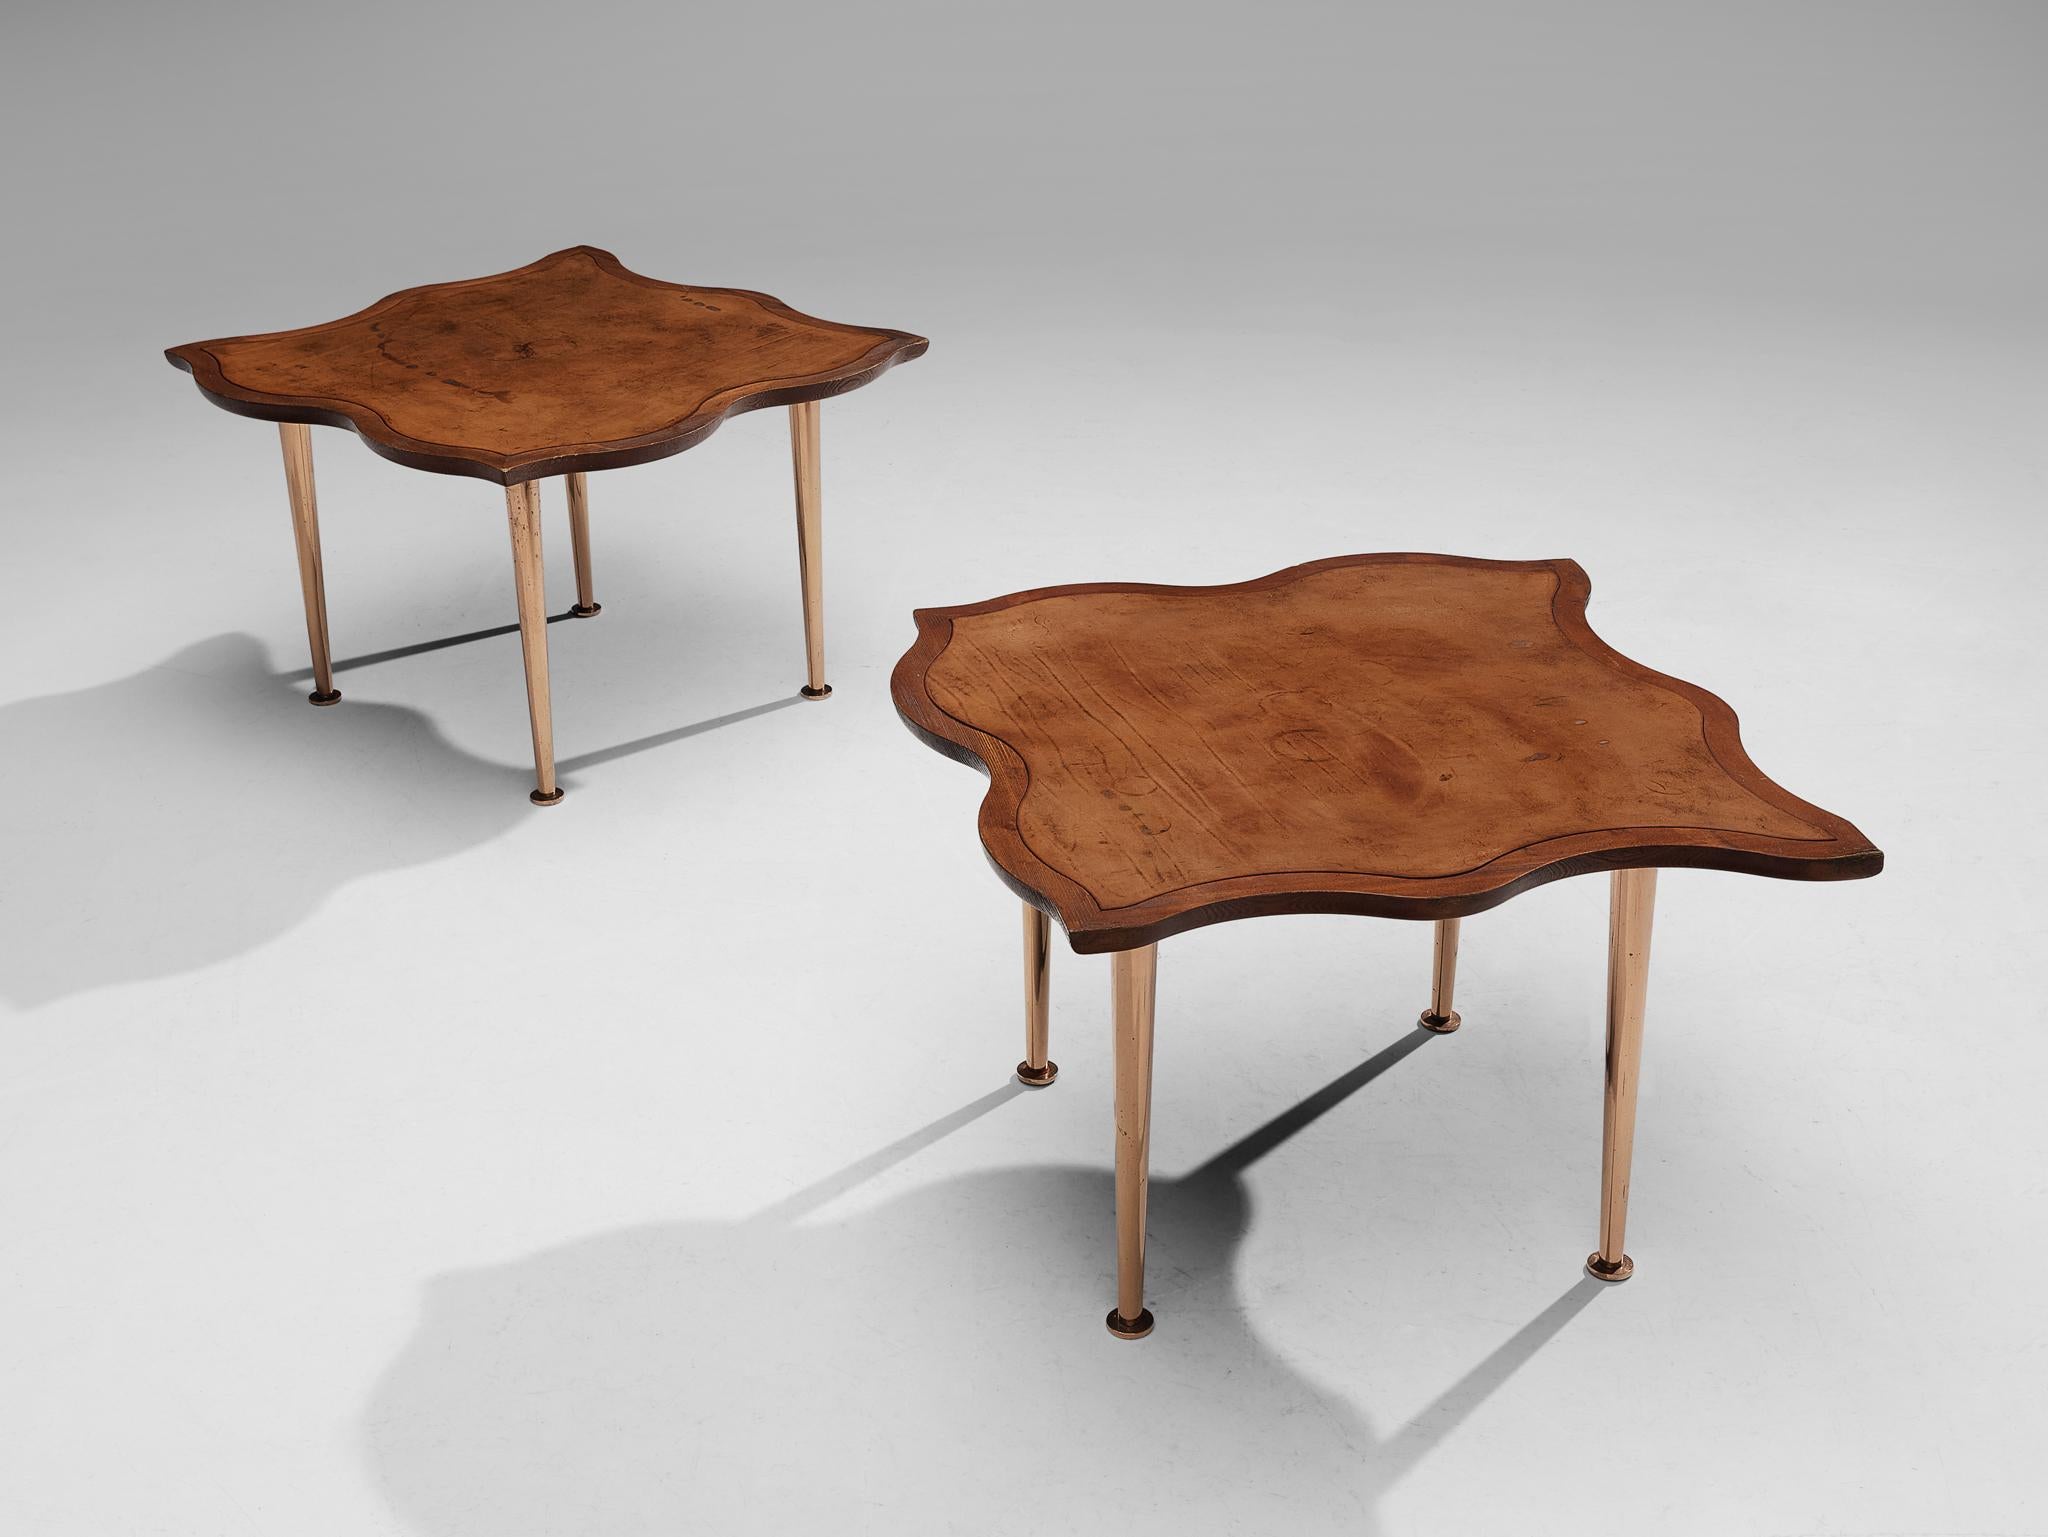 Pair of side tables, pine, leather, copper anodized metal, France, 1960s. 
 
This extraordinary pair of side tables features a remarkable biomorphic tabletop, and due to its shape this set fits together like one puzzle. Beautiful patinated cognac